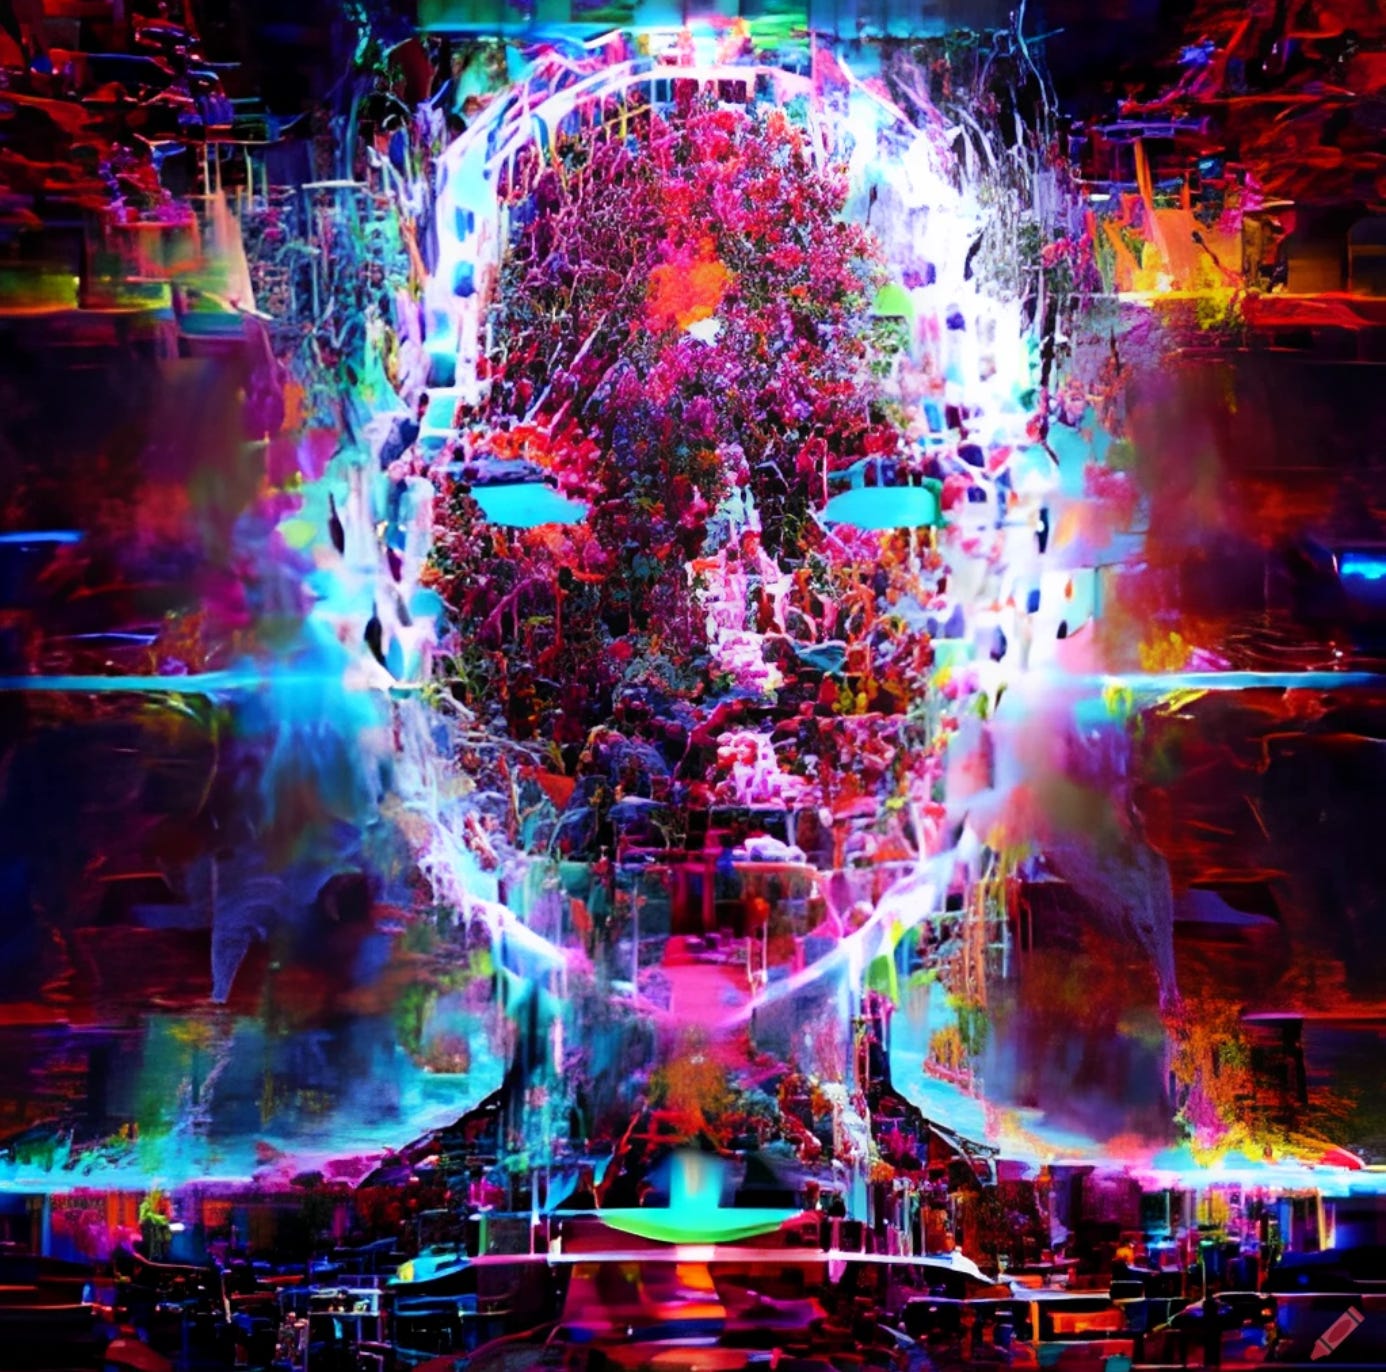 An image of a futuristic head inspired by Craiyon.com image generation